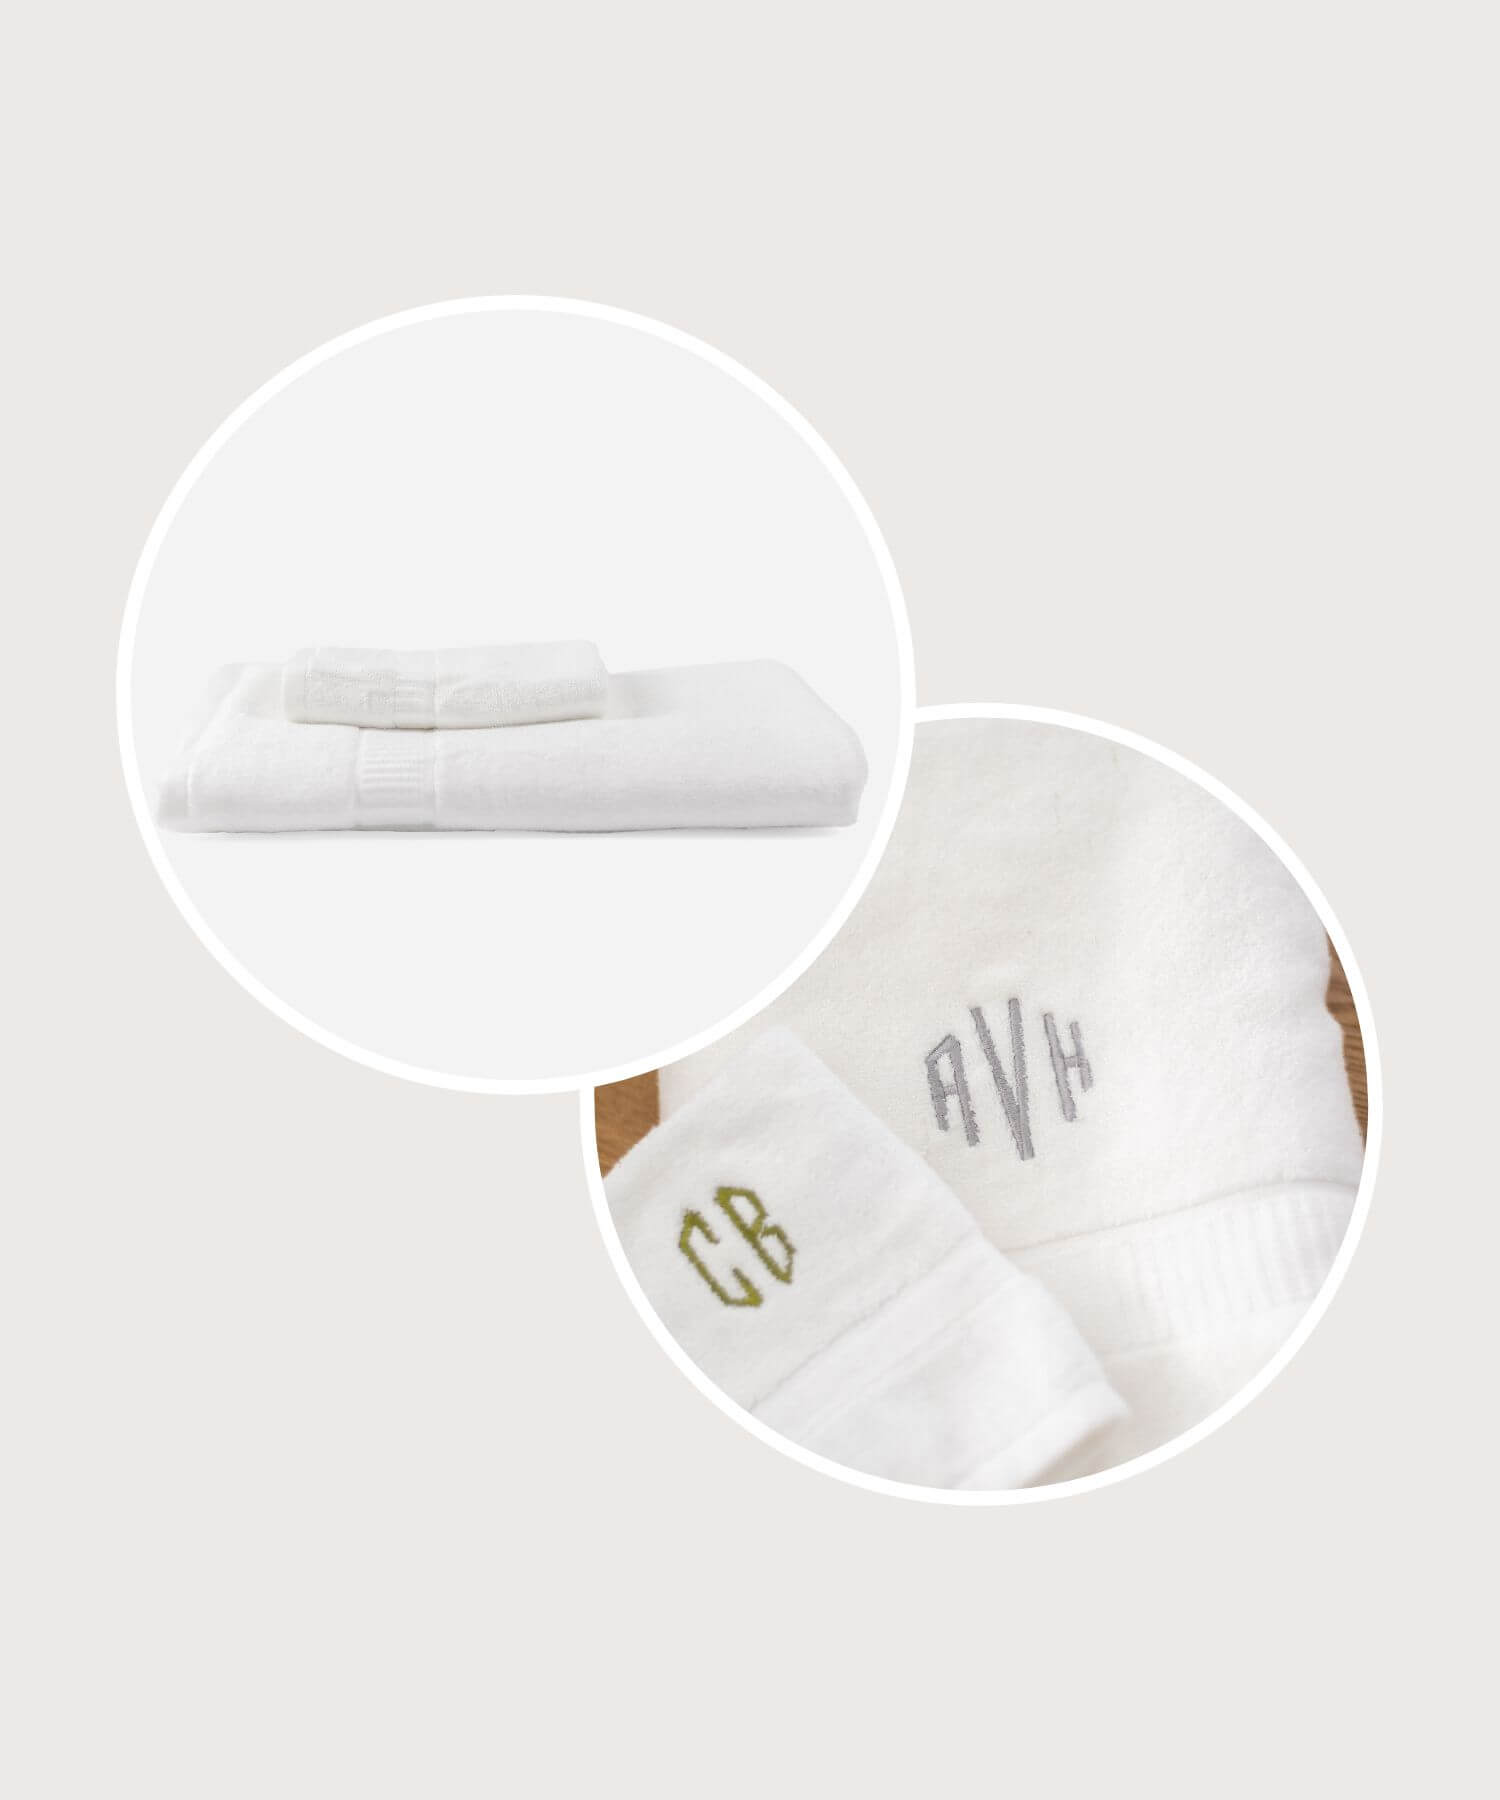 ava and ava ph organic bamboo face and bath towels with personalized monogram embroidery